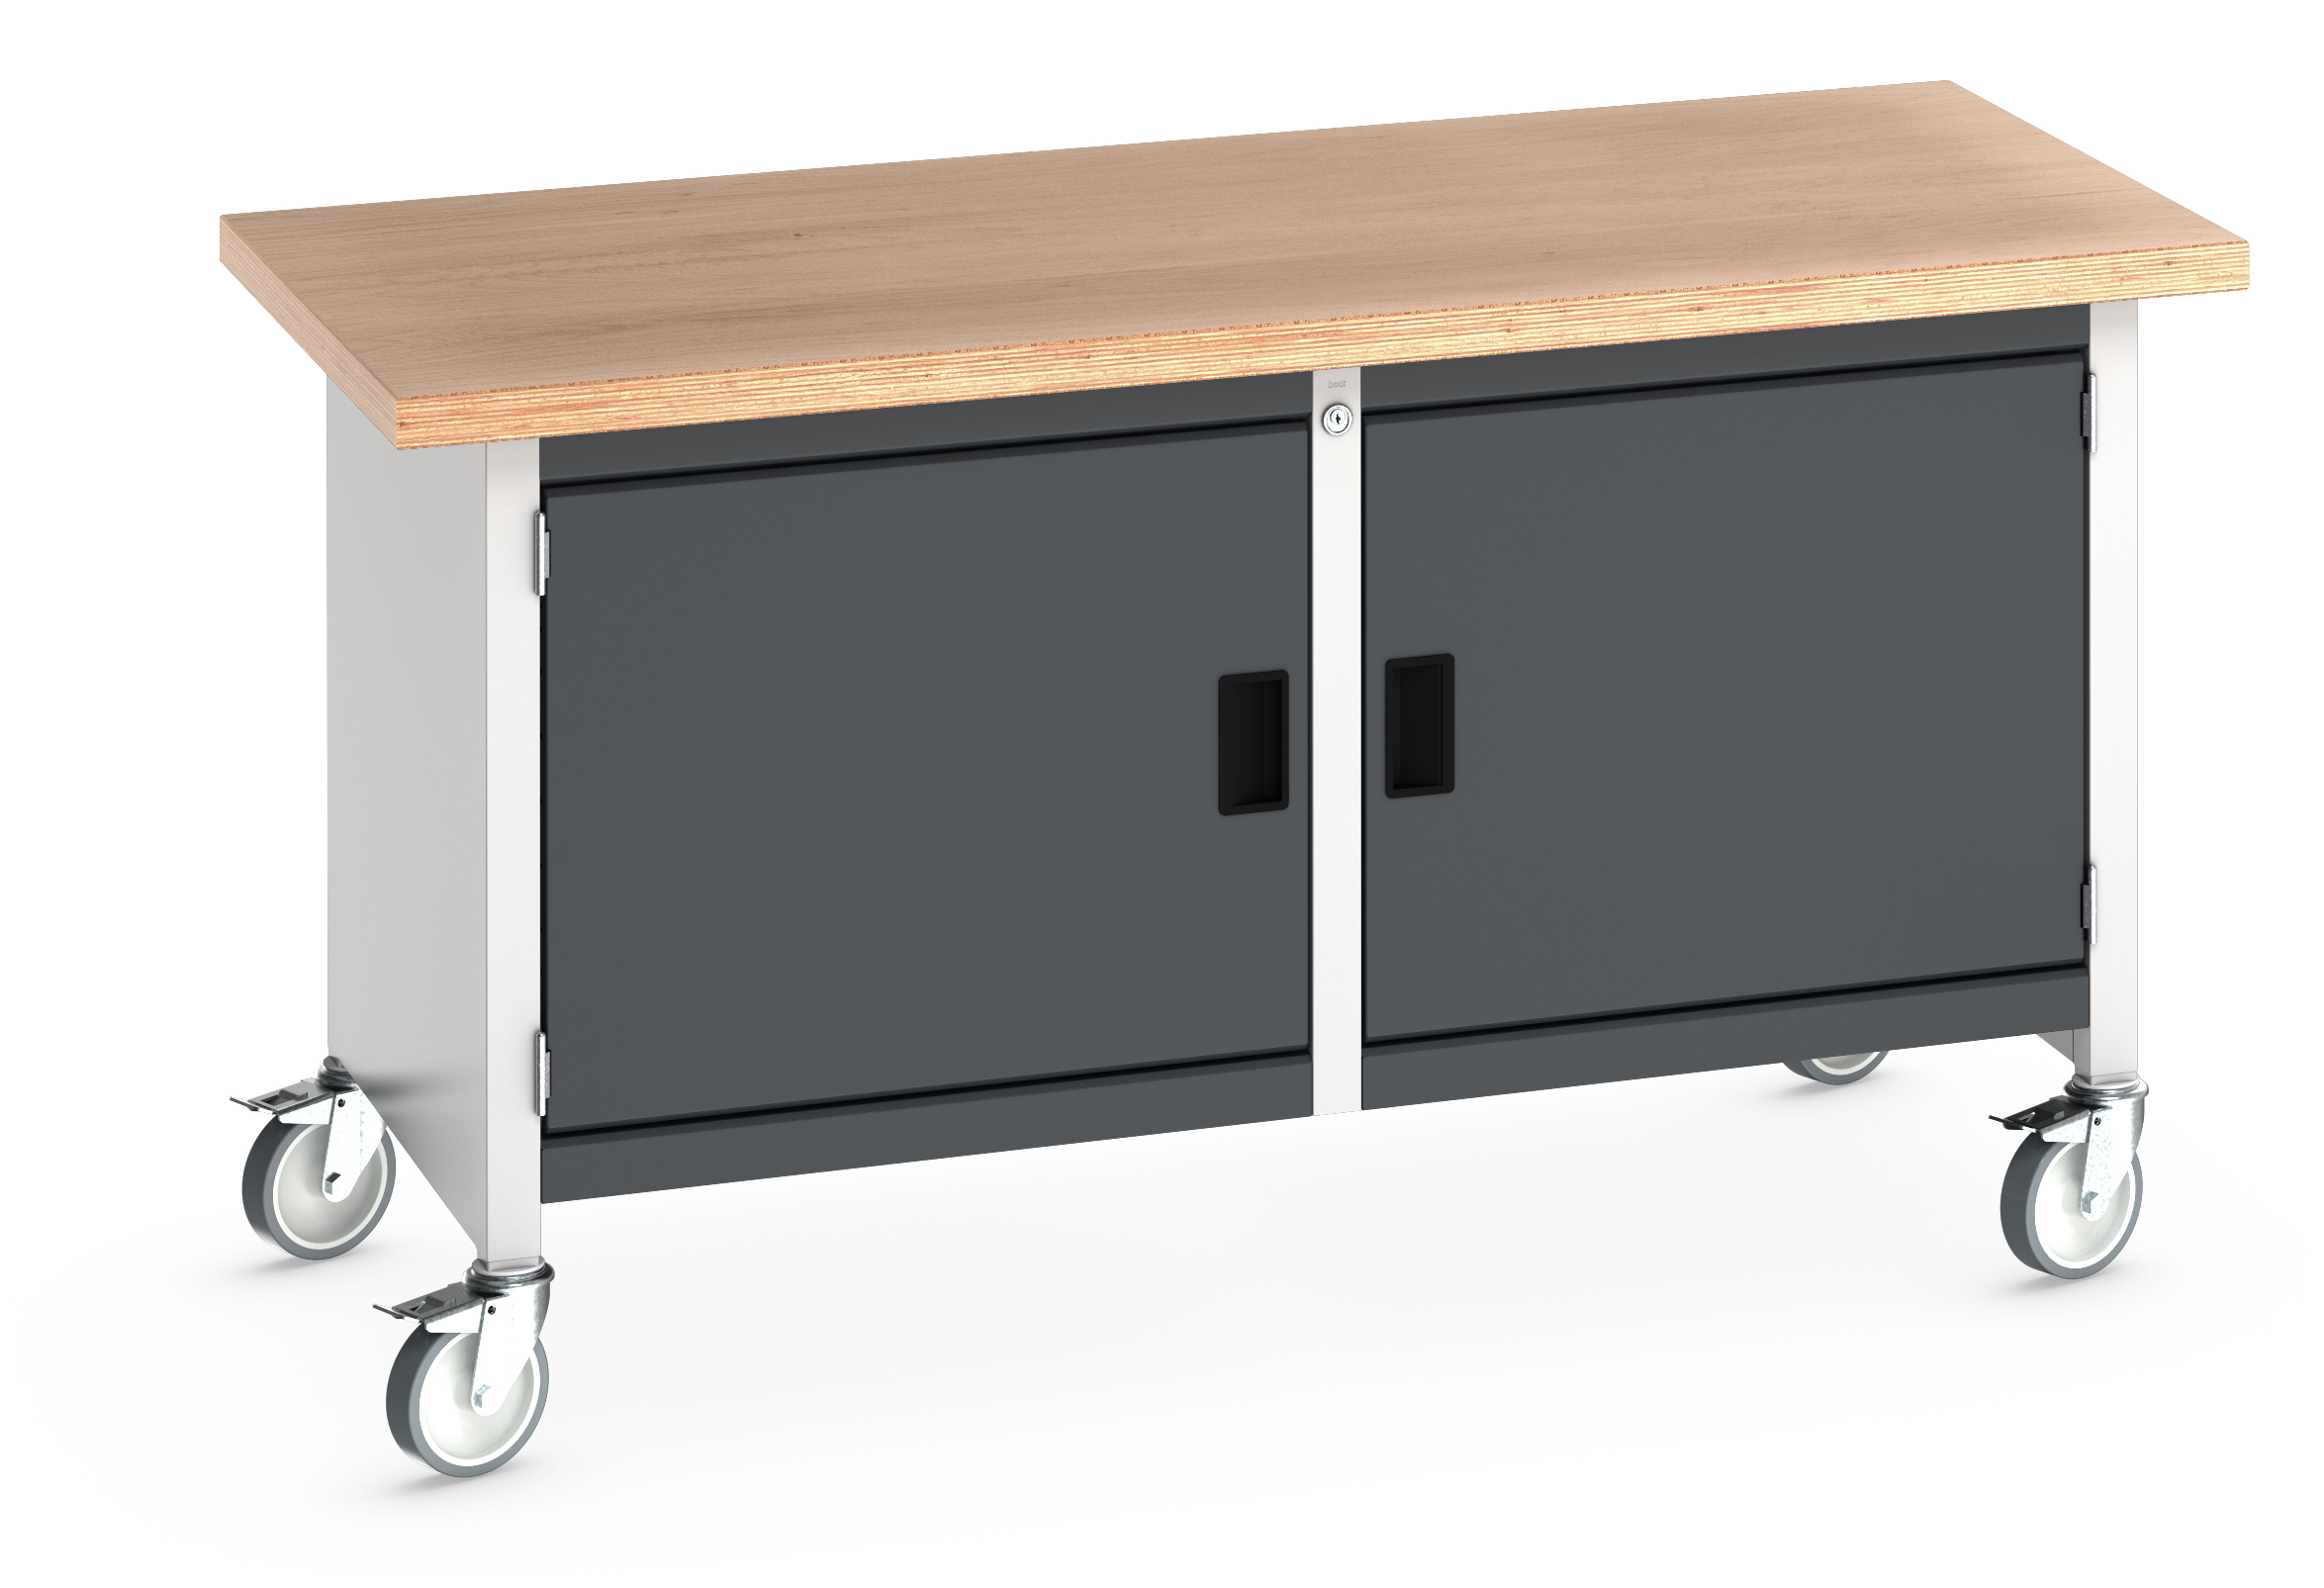 Bott Cubio Mobile Storage Bench With Full Cupboard / Full Cupboard - 41002097.19V